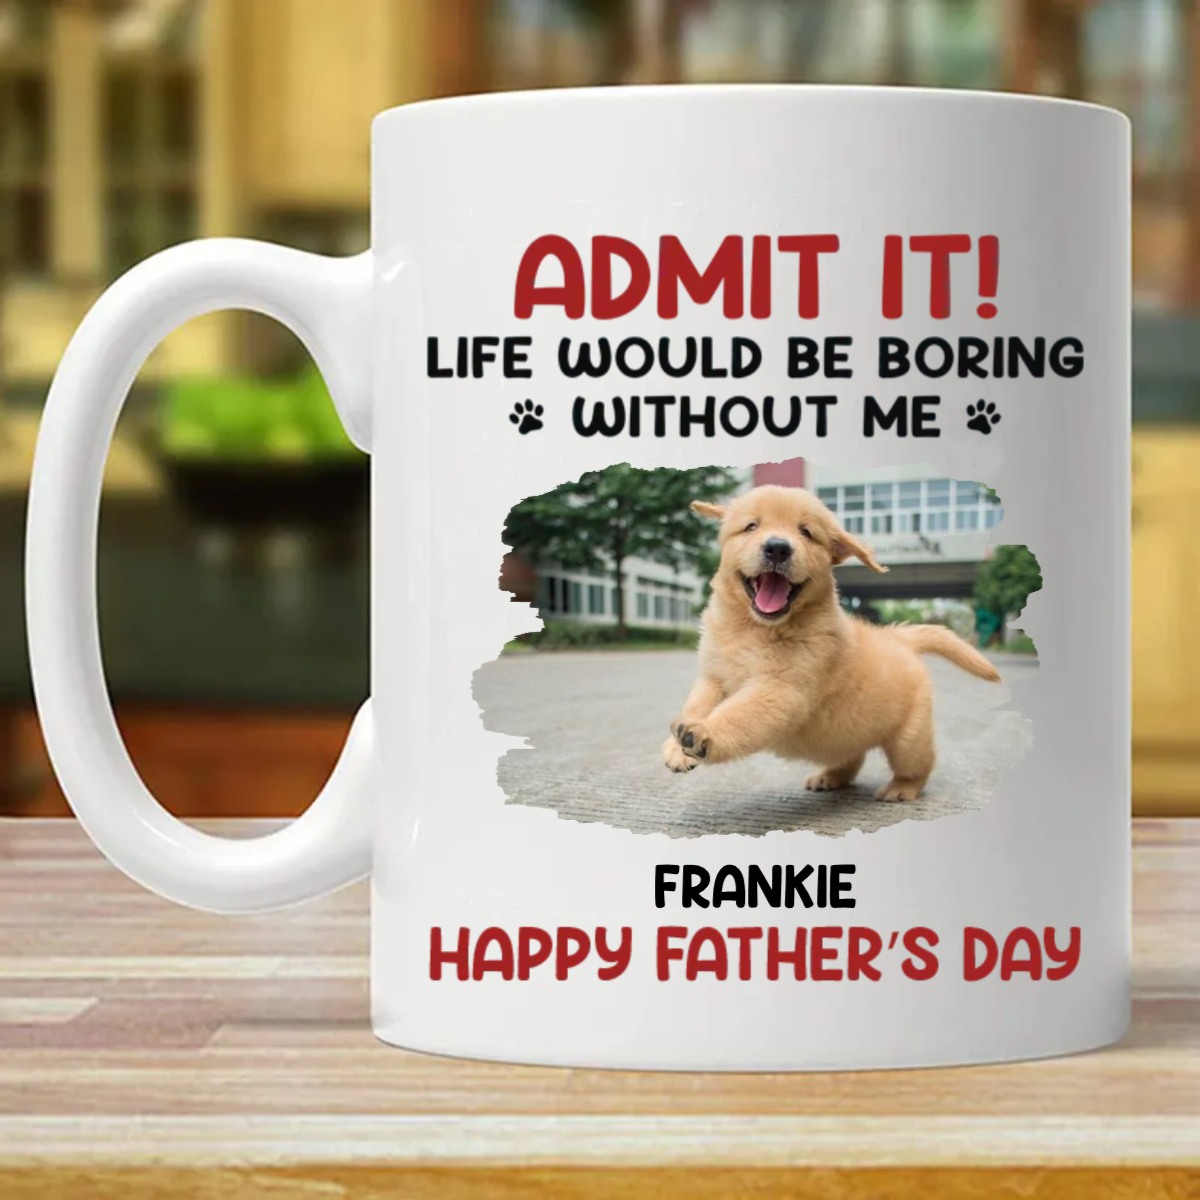 Custom Photo Life Would Be Boring Without Me - Dog & Cat Personalized Custom Mug - Father's Day, Mother's Day, Gift For Pet Owners, Pet Lovers